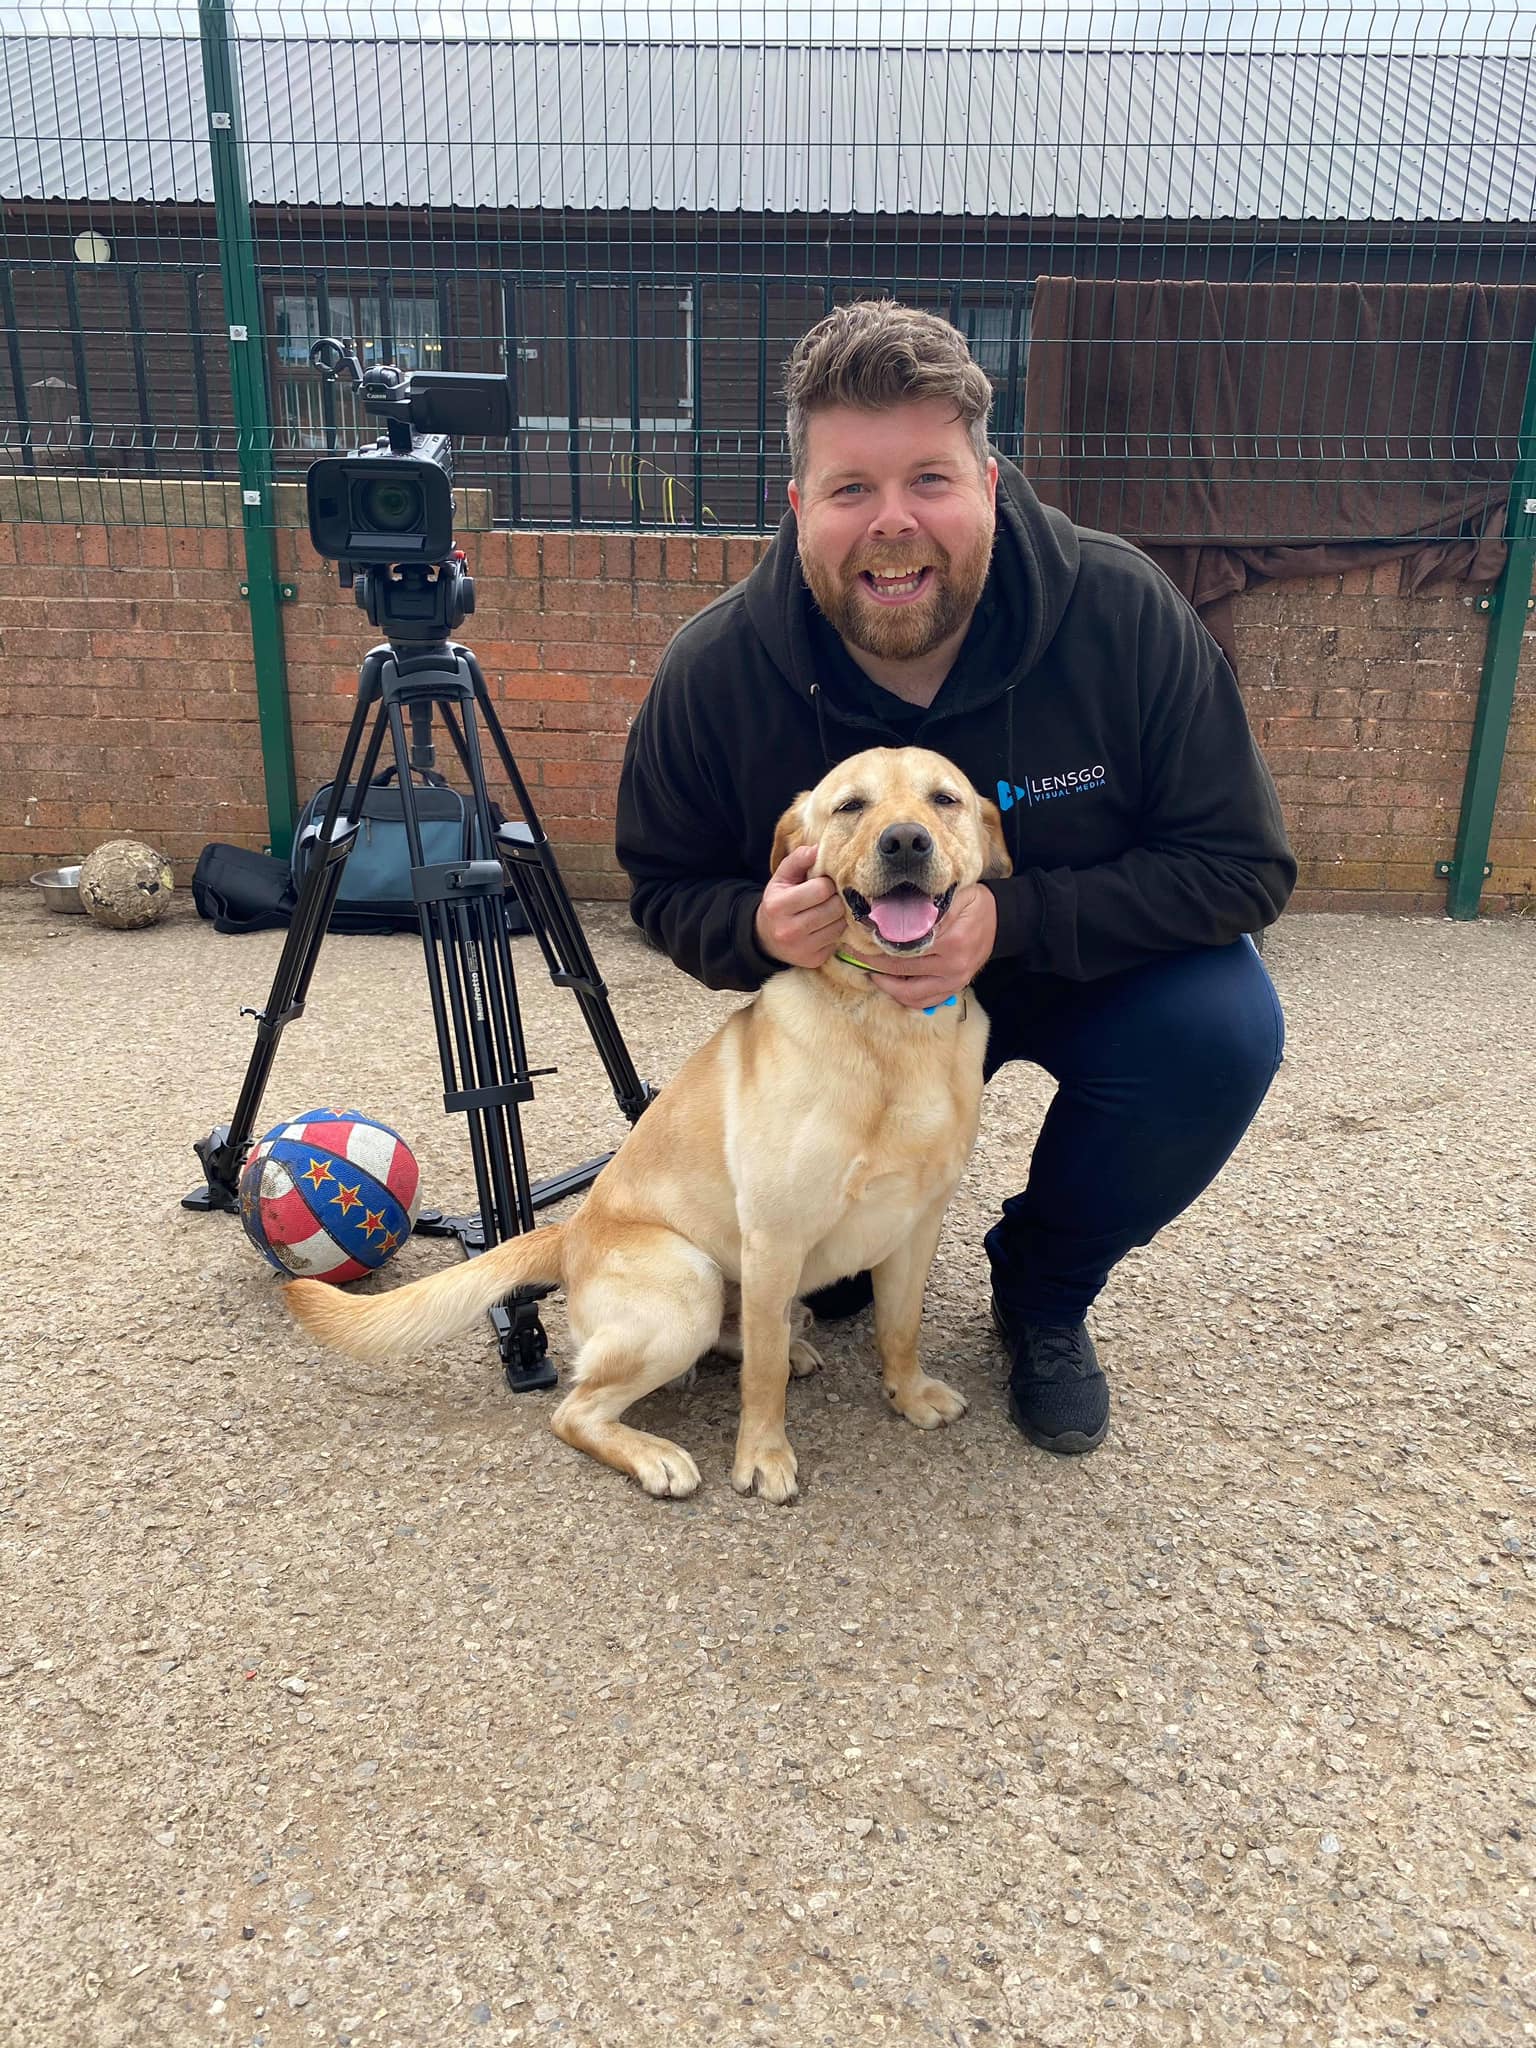 Rotherham videographer joins Thornberry Animal Sanctuary as Trustee